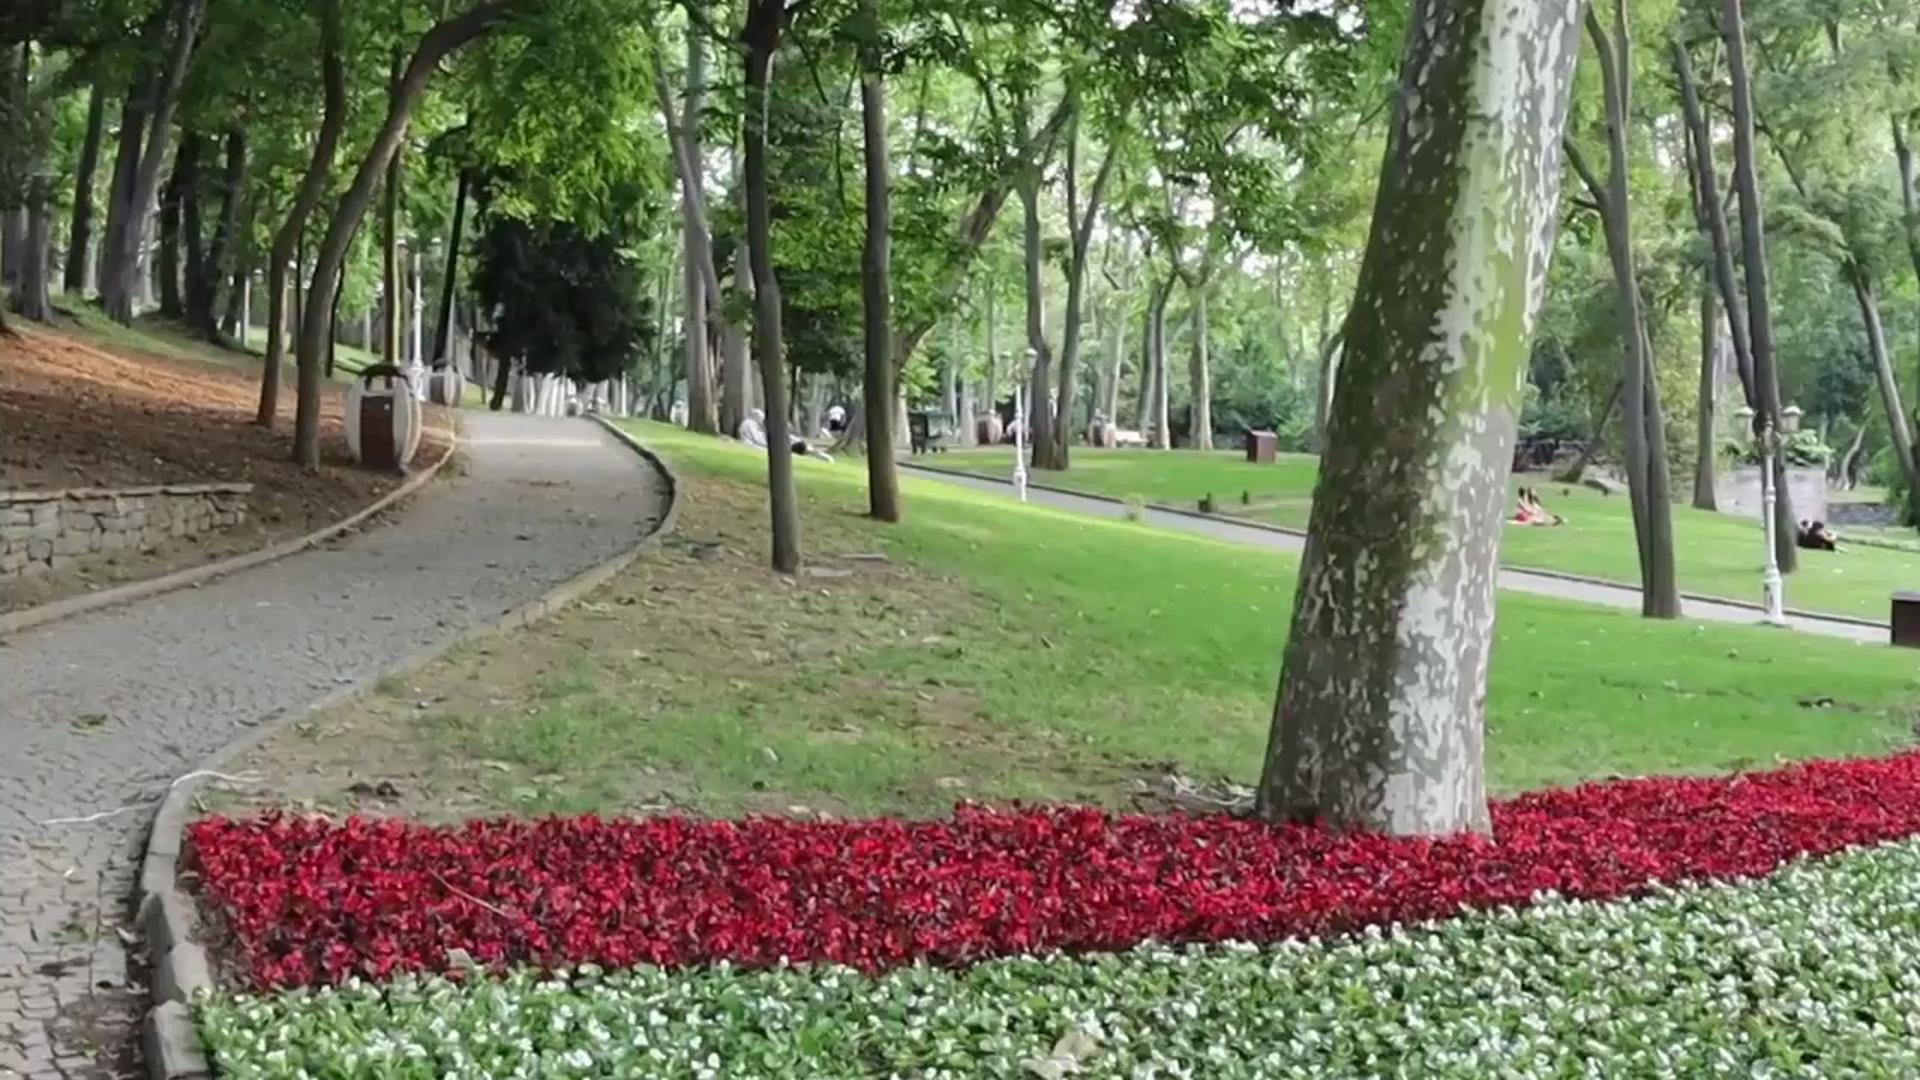 Gulhane Park of Istanbul